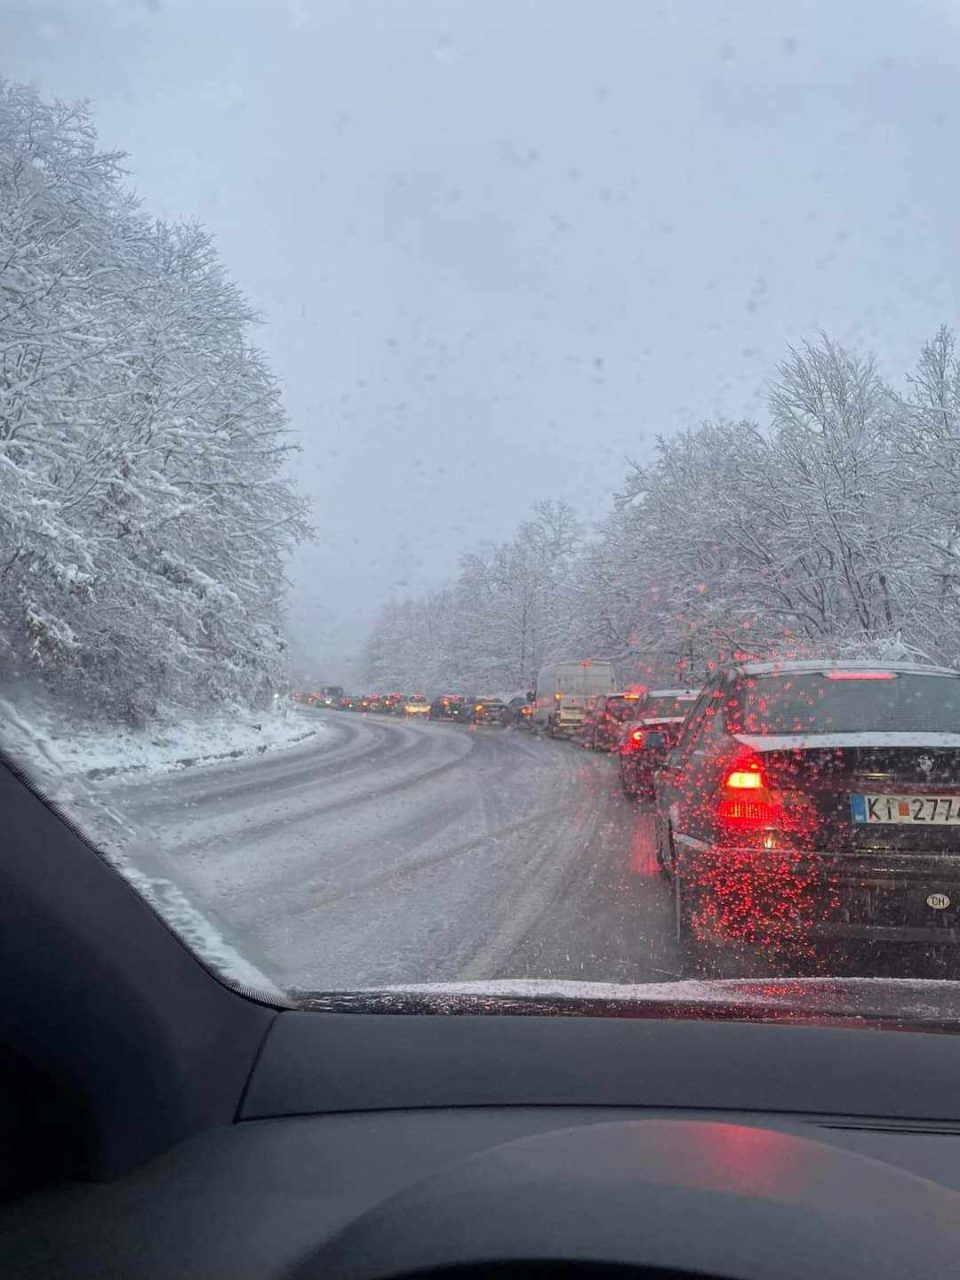 Snow disrupts traffic on the mountain roads